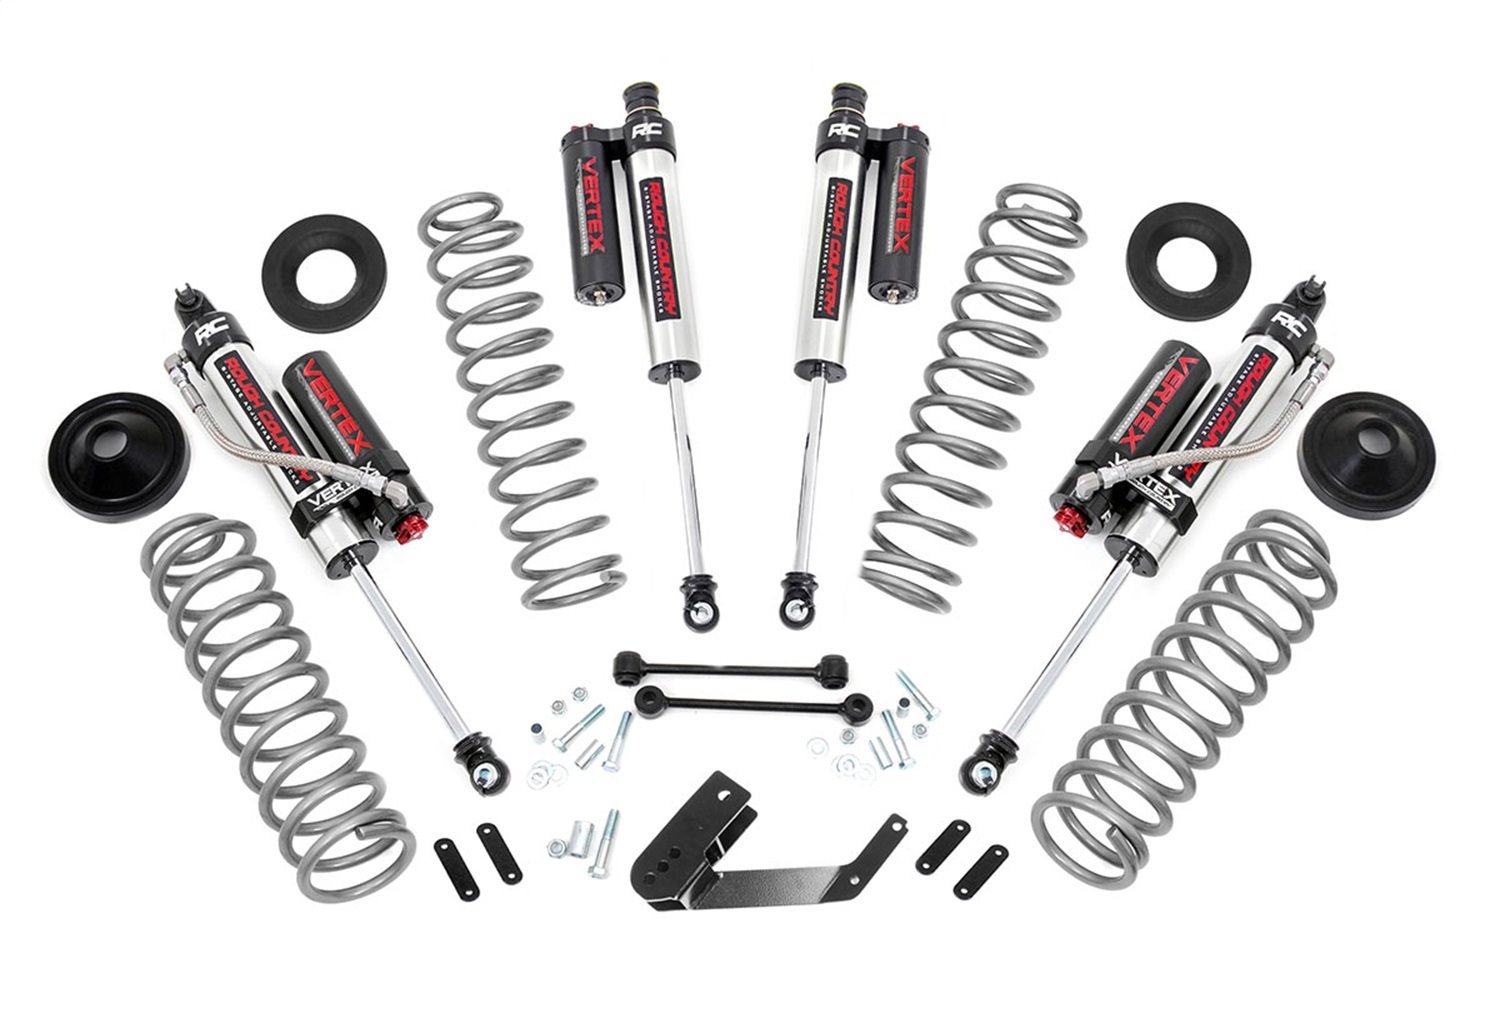 66950 Front and Rear Suspension Lift Kit, Lift Amount: 3.25 in. Front/3.25 in. Rear